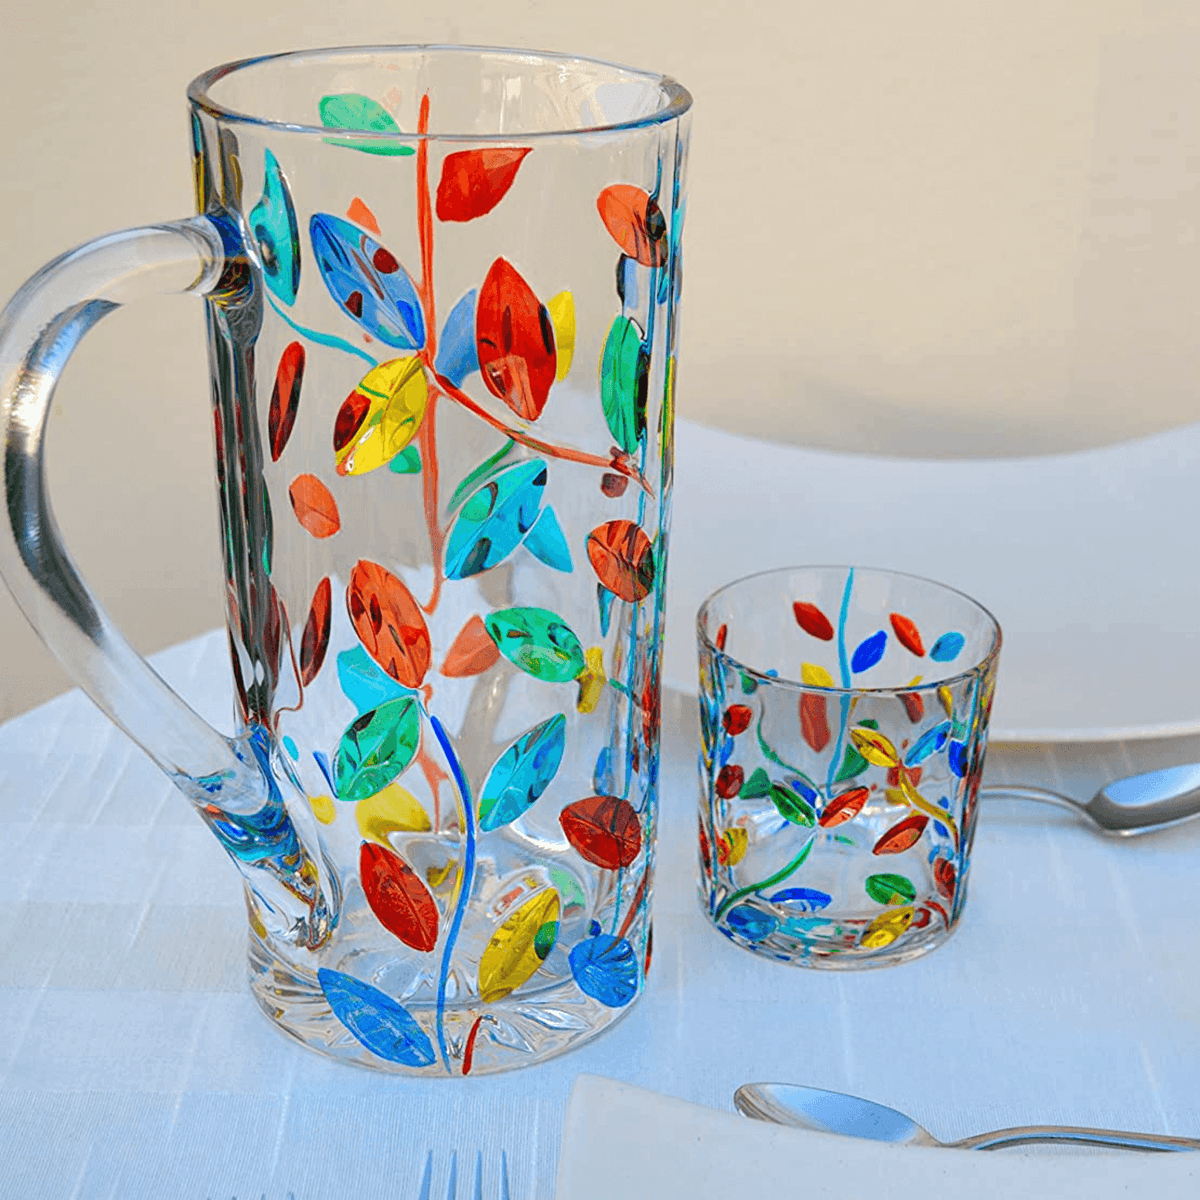 Flowervine Hand-Painted Italian Crystal Drink Pitcher at MyItalianDecor